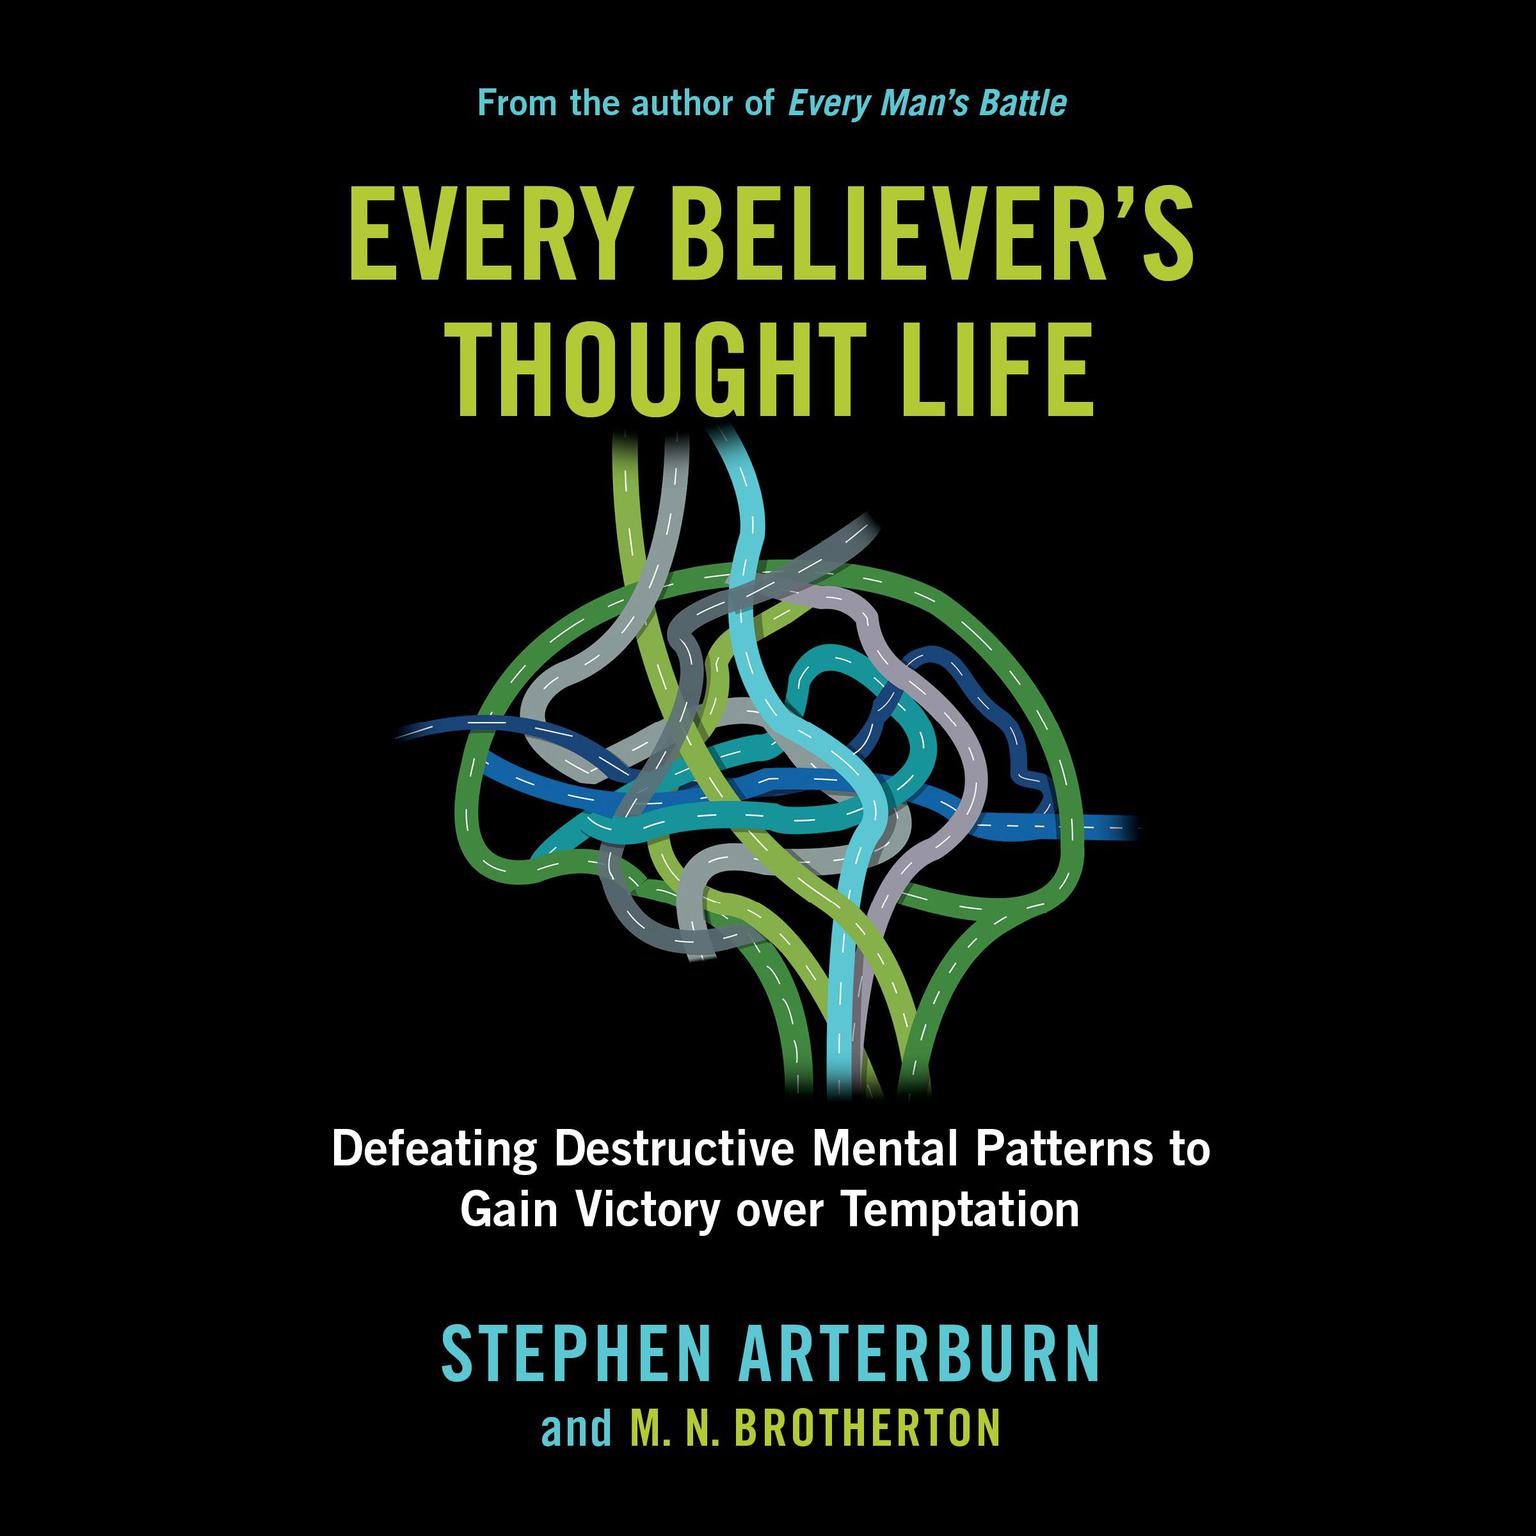 Every Believers Thought Life: Destructive Mental Patterns to Gain Victory Over Temptation Audiobook, by Stephen Arterburn